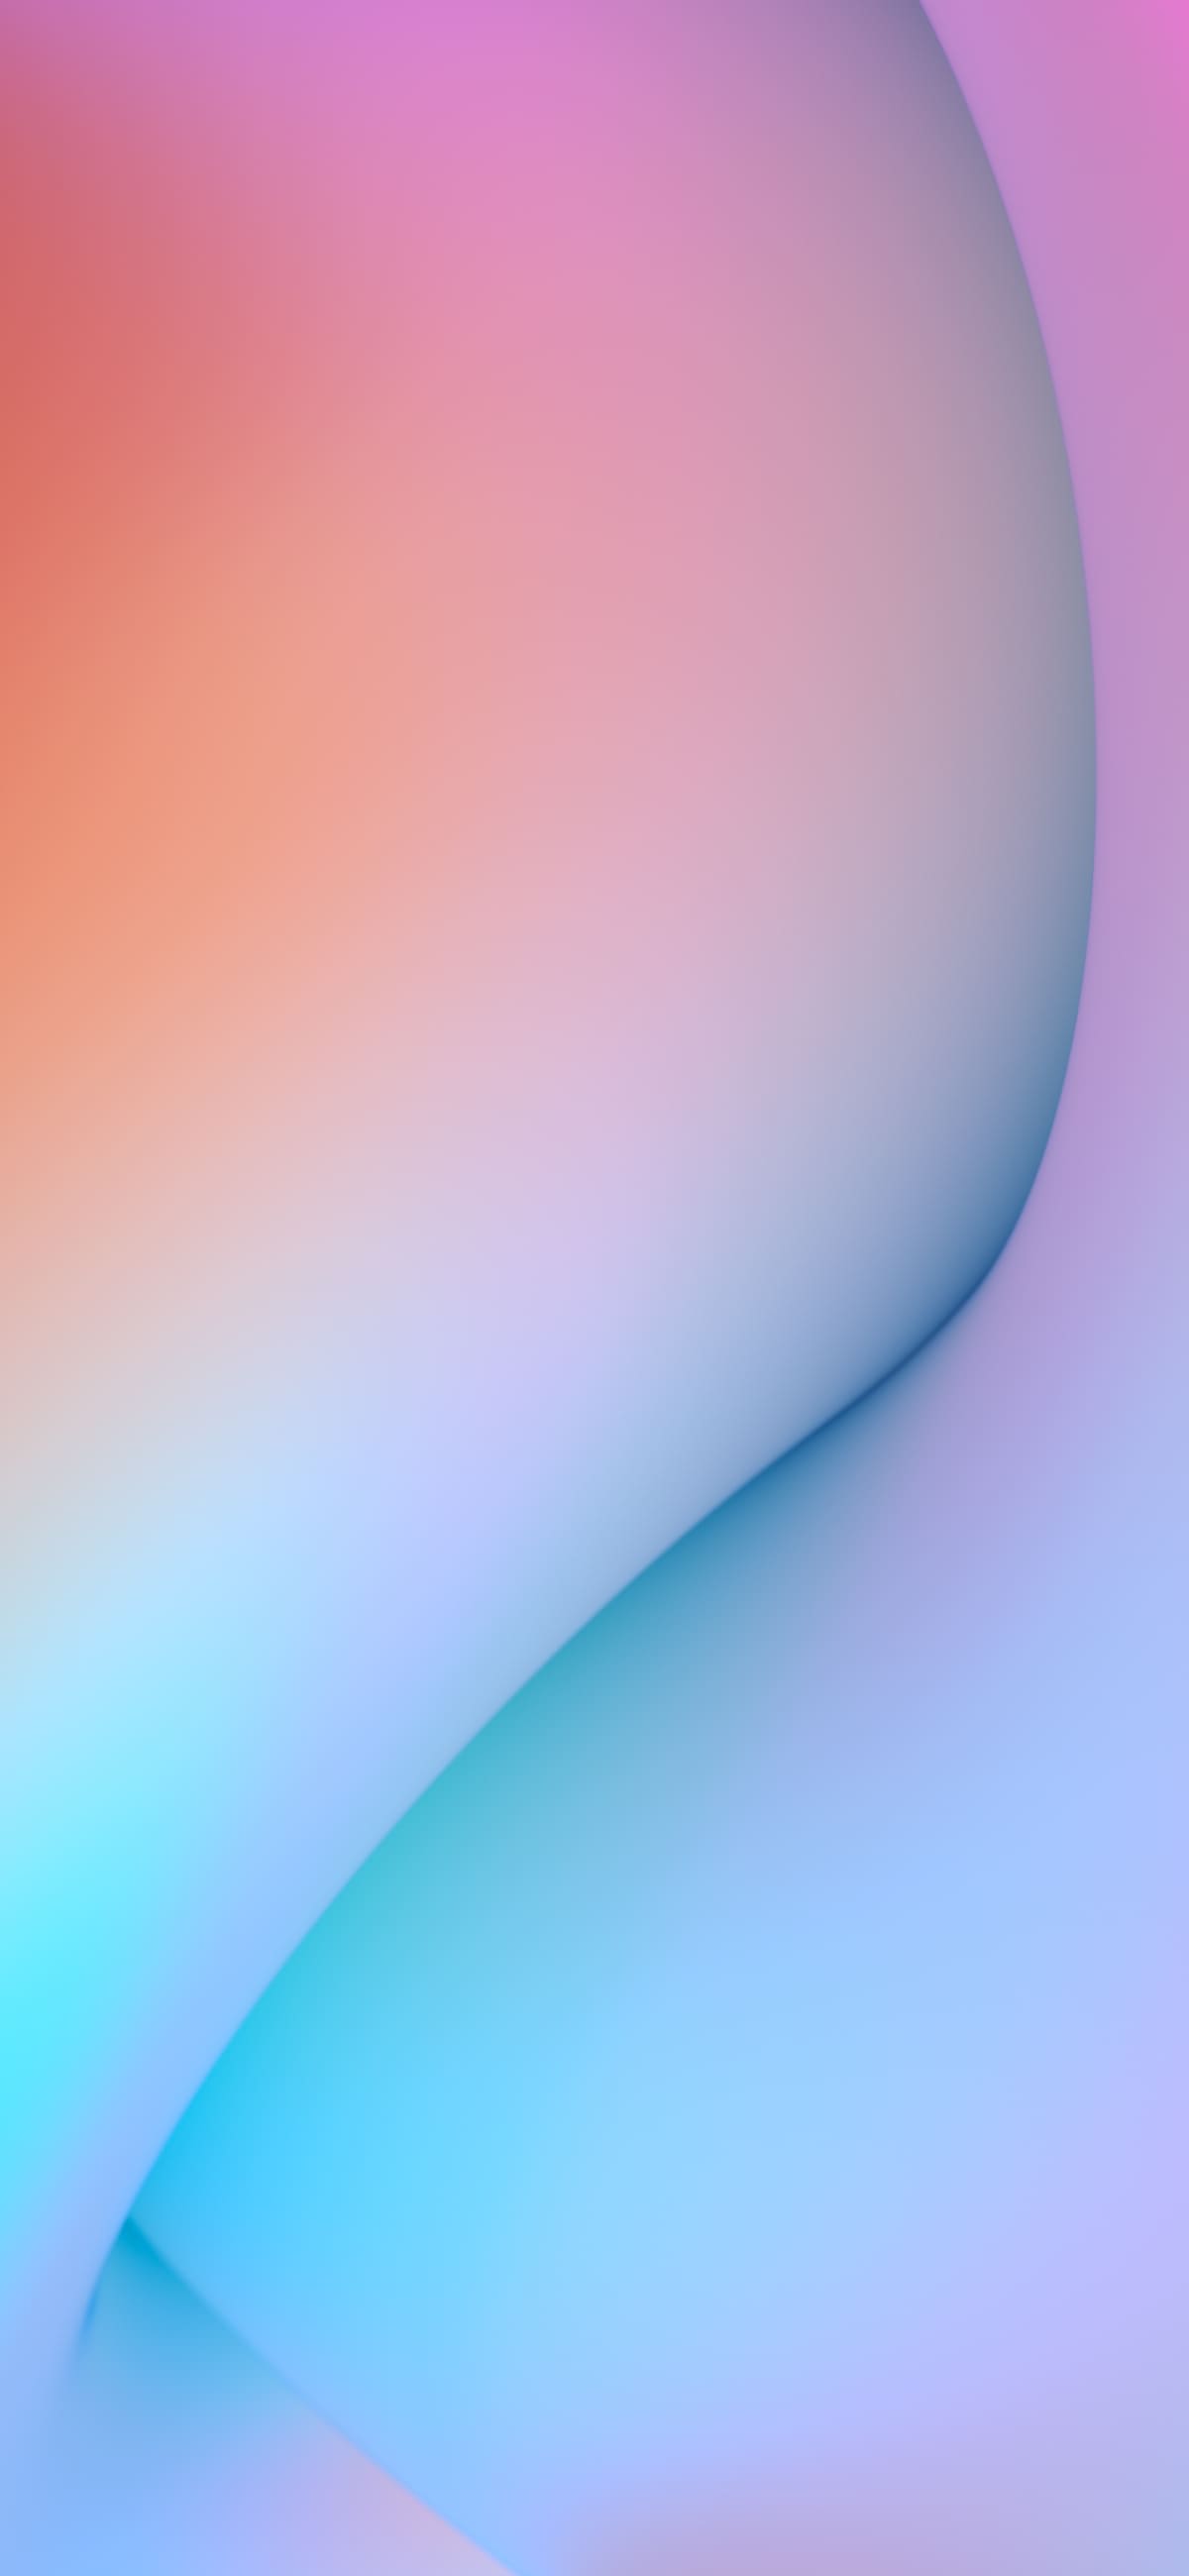 Download Ios 12 Wallpapers (8 Wallpapers) - Droidviews